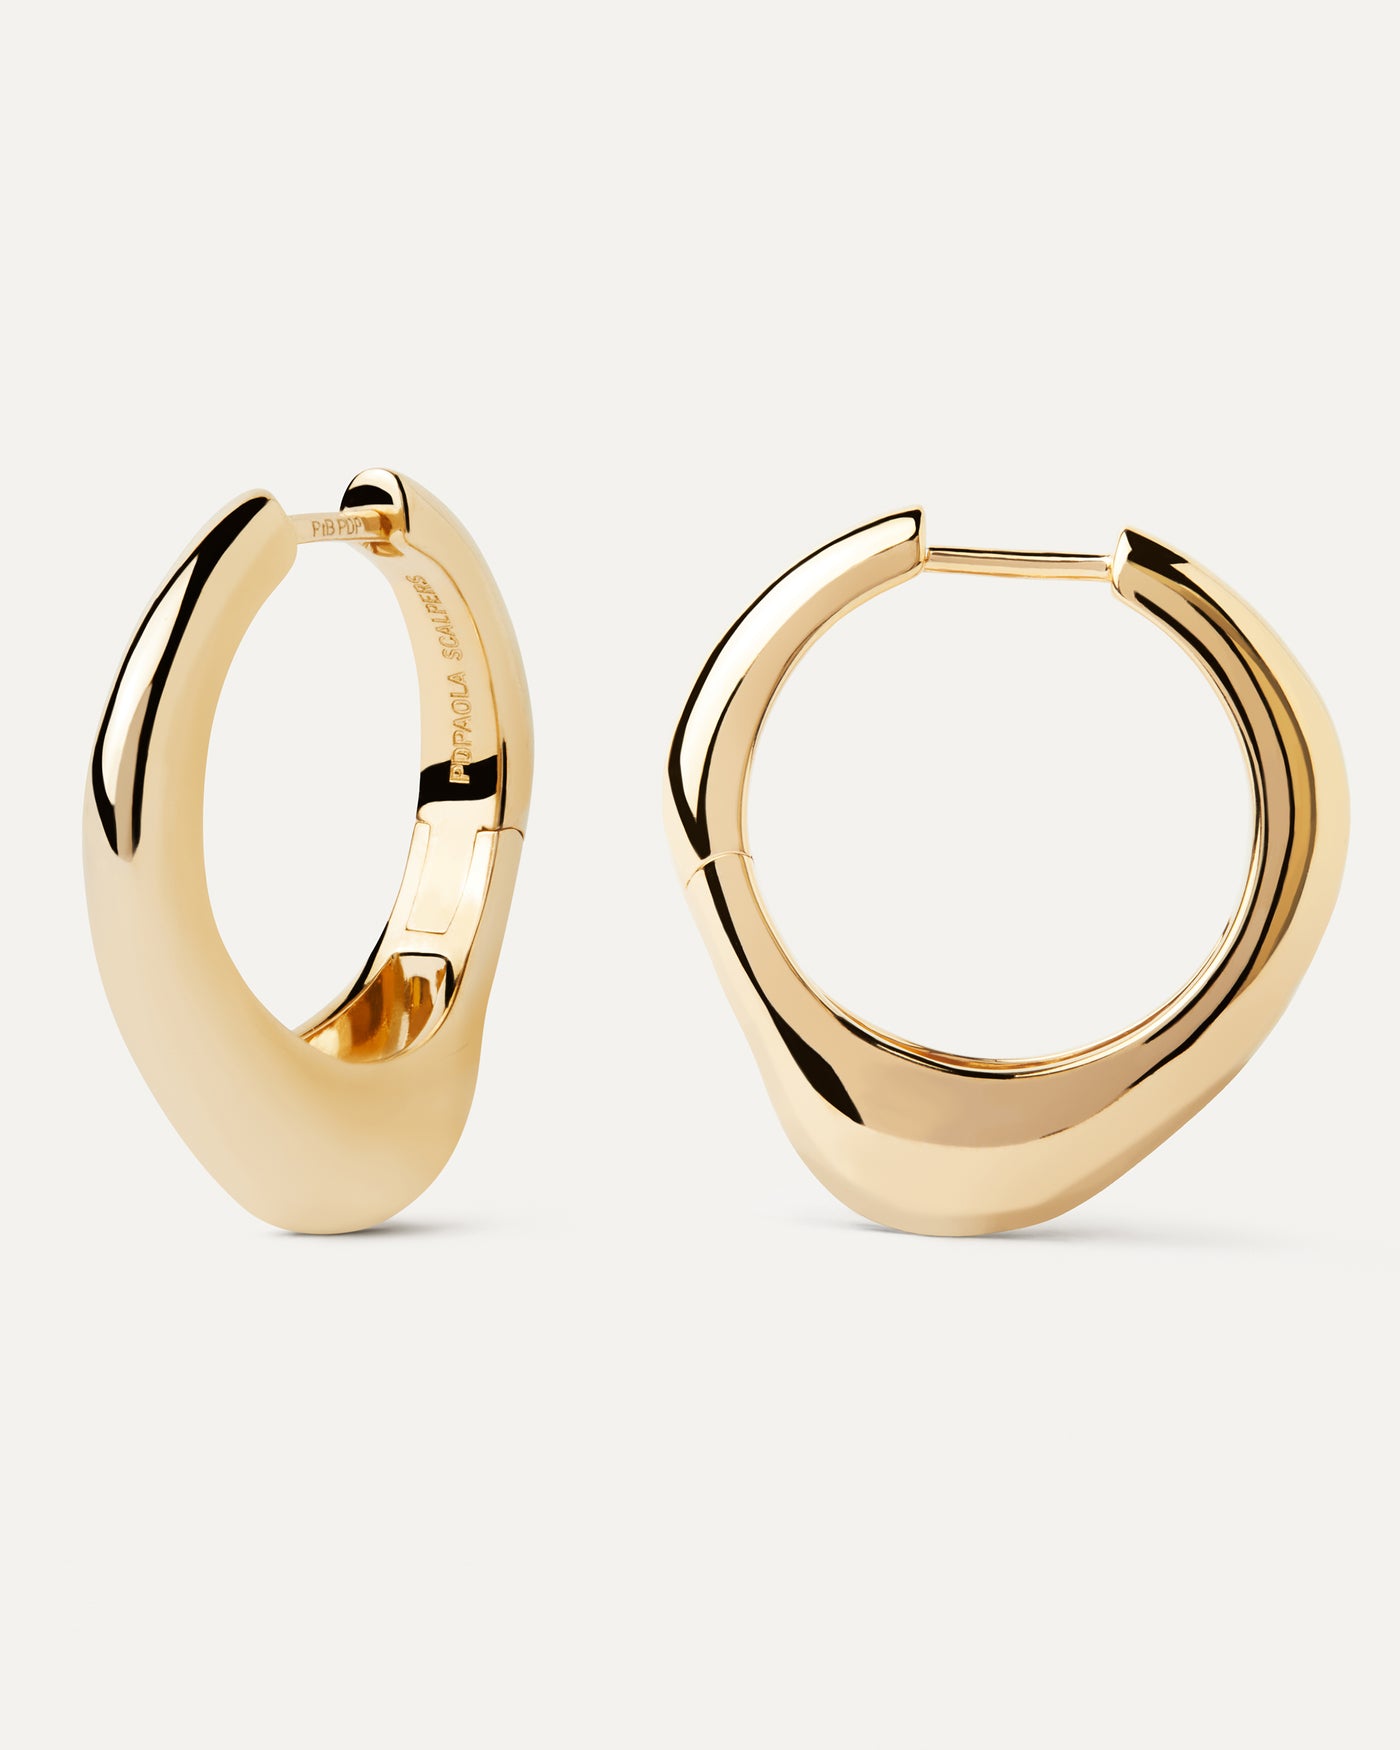 2023 Selection | Riba Hoops. Gold-plated organic shape mini huggie hoops with a fluid design. Get the latest arrival from PDPAOLA. Place your order safely and get this Best Seller. Free Shipping.